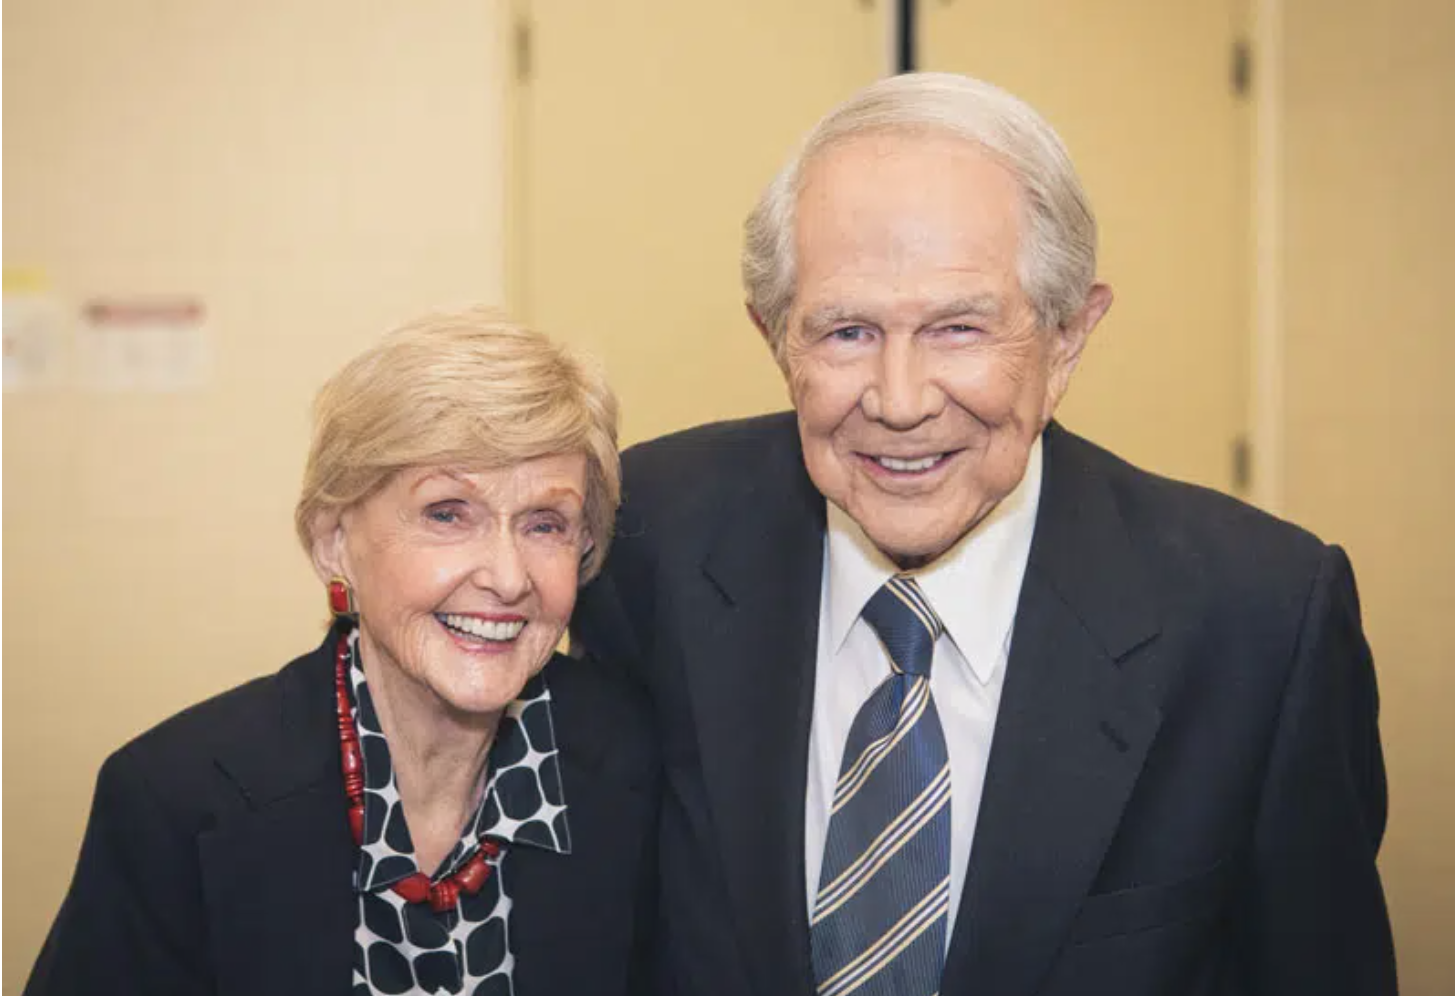 Pat Robertson and his wife, Dede Robertson